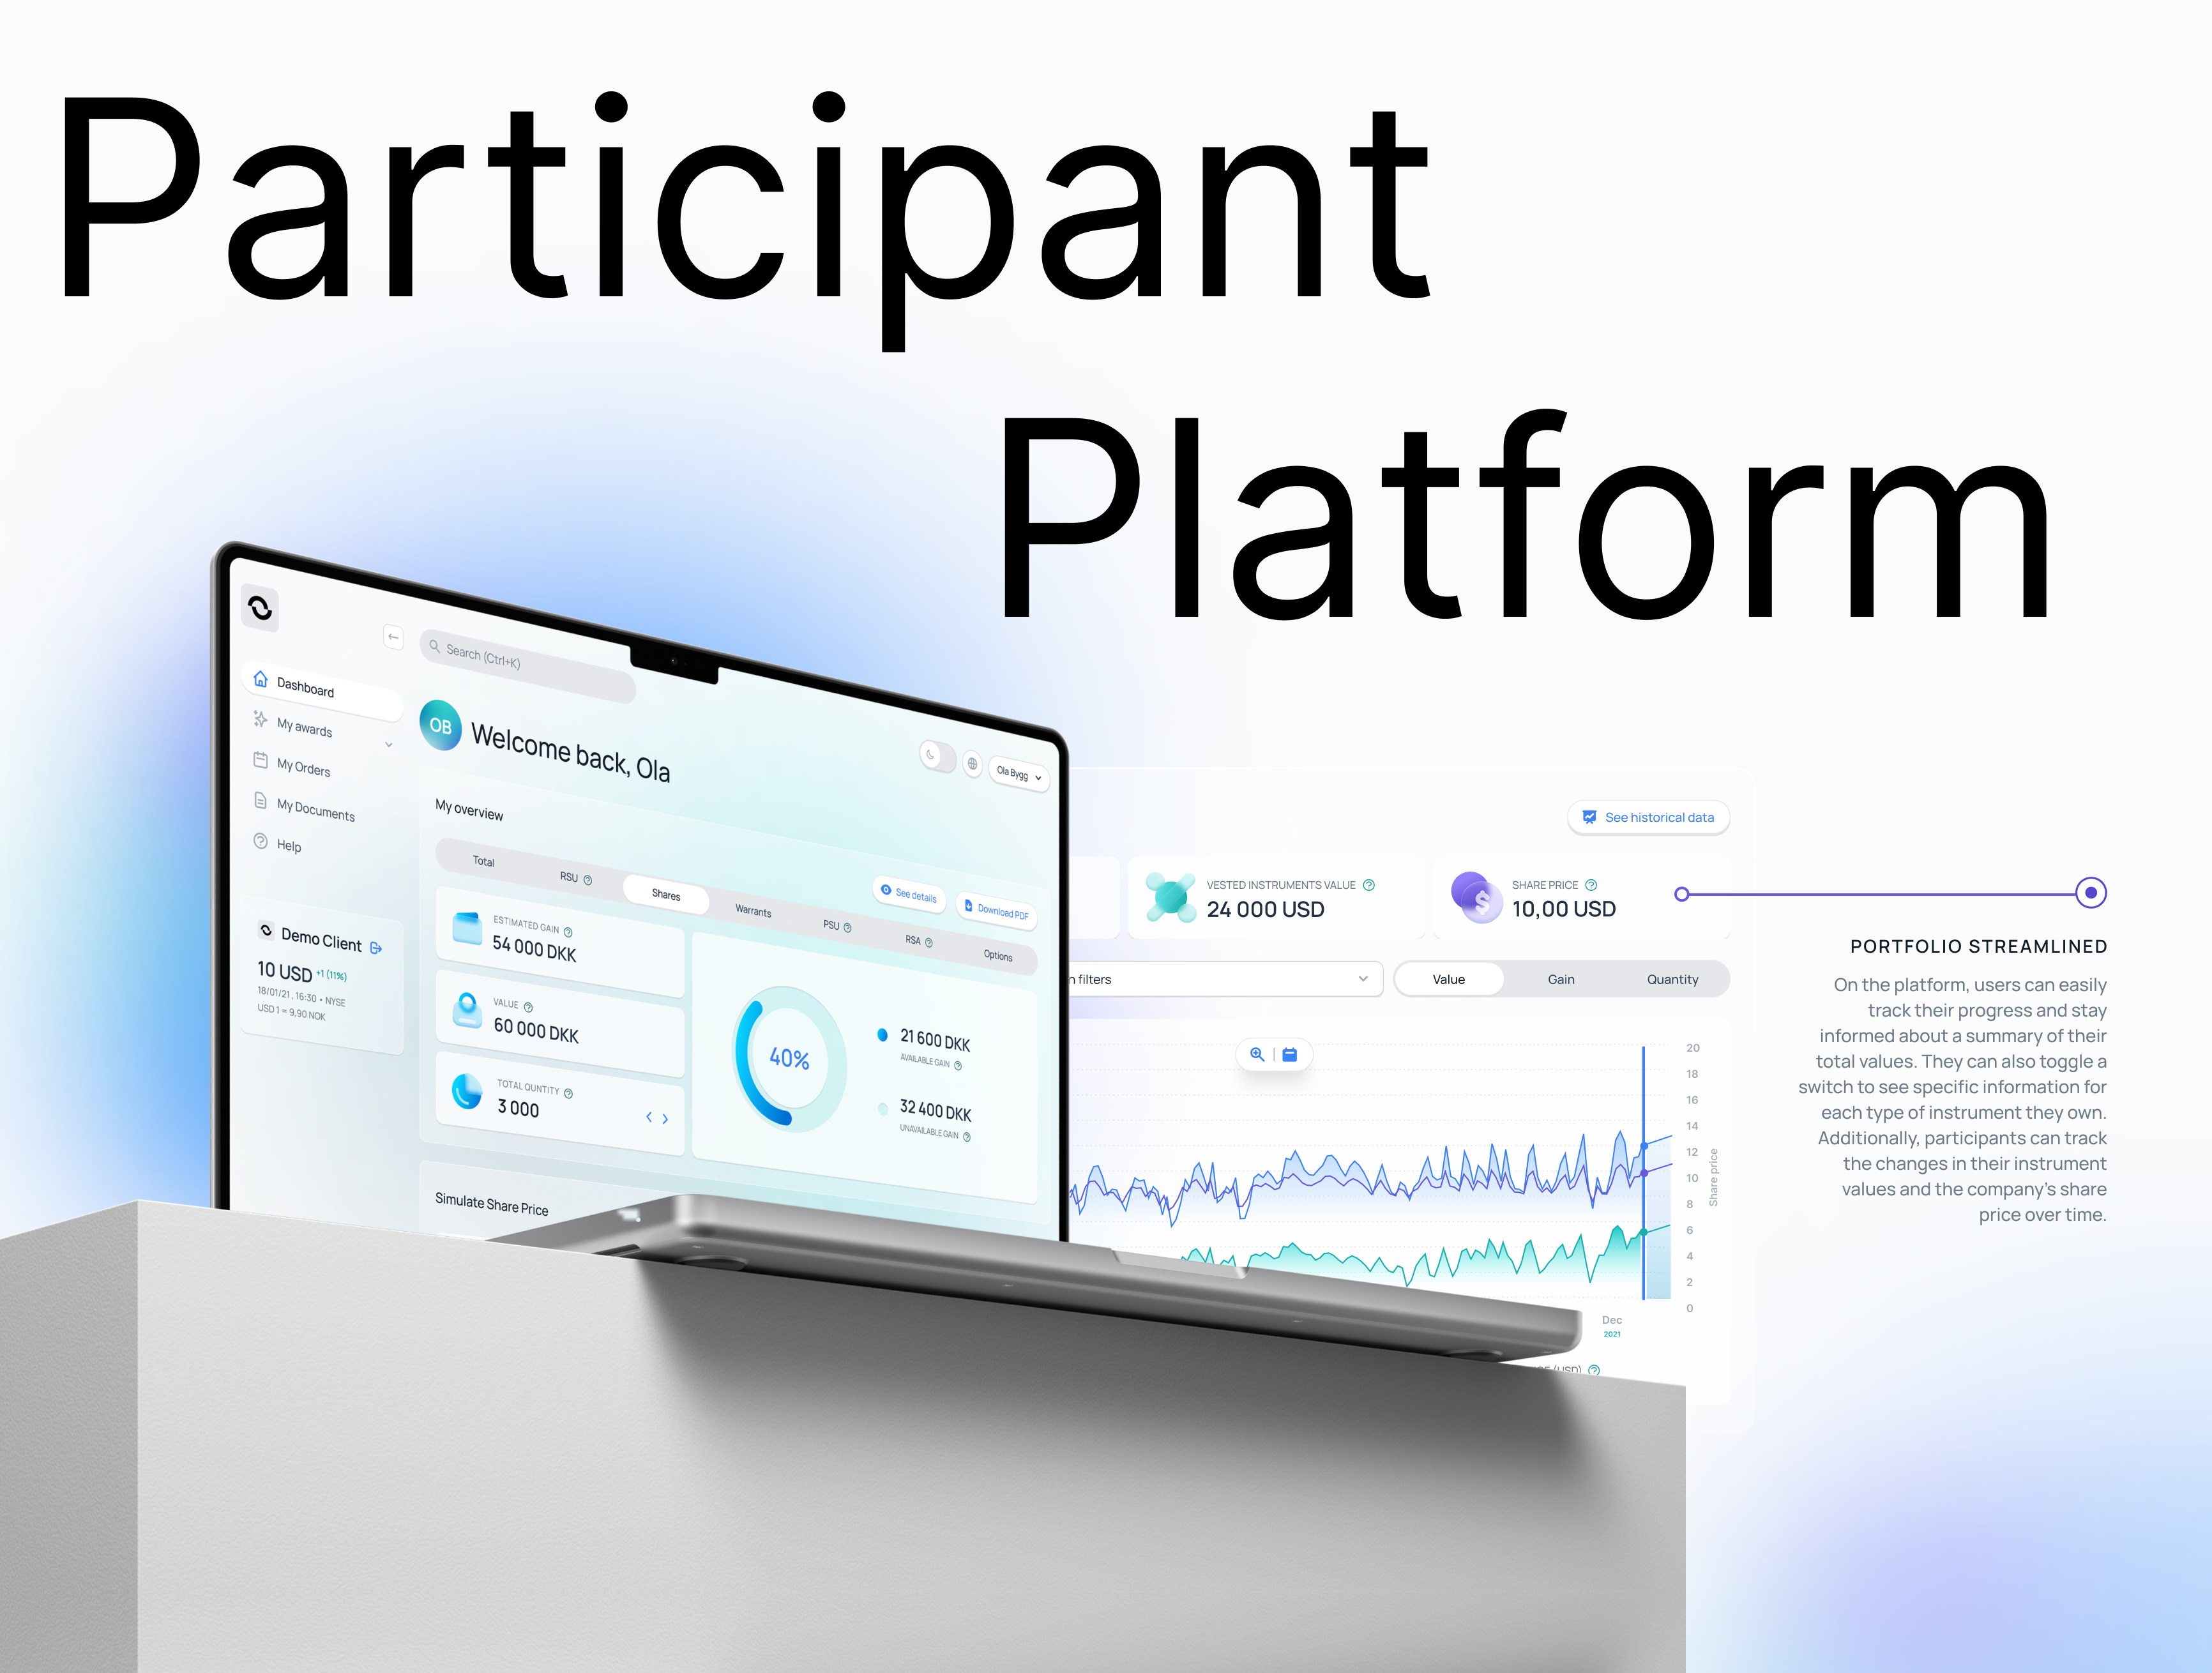 Optio - Participant portal - Seamlessly manage equity globally with local expertise